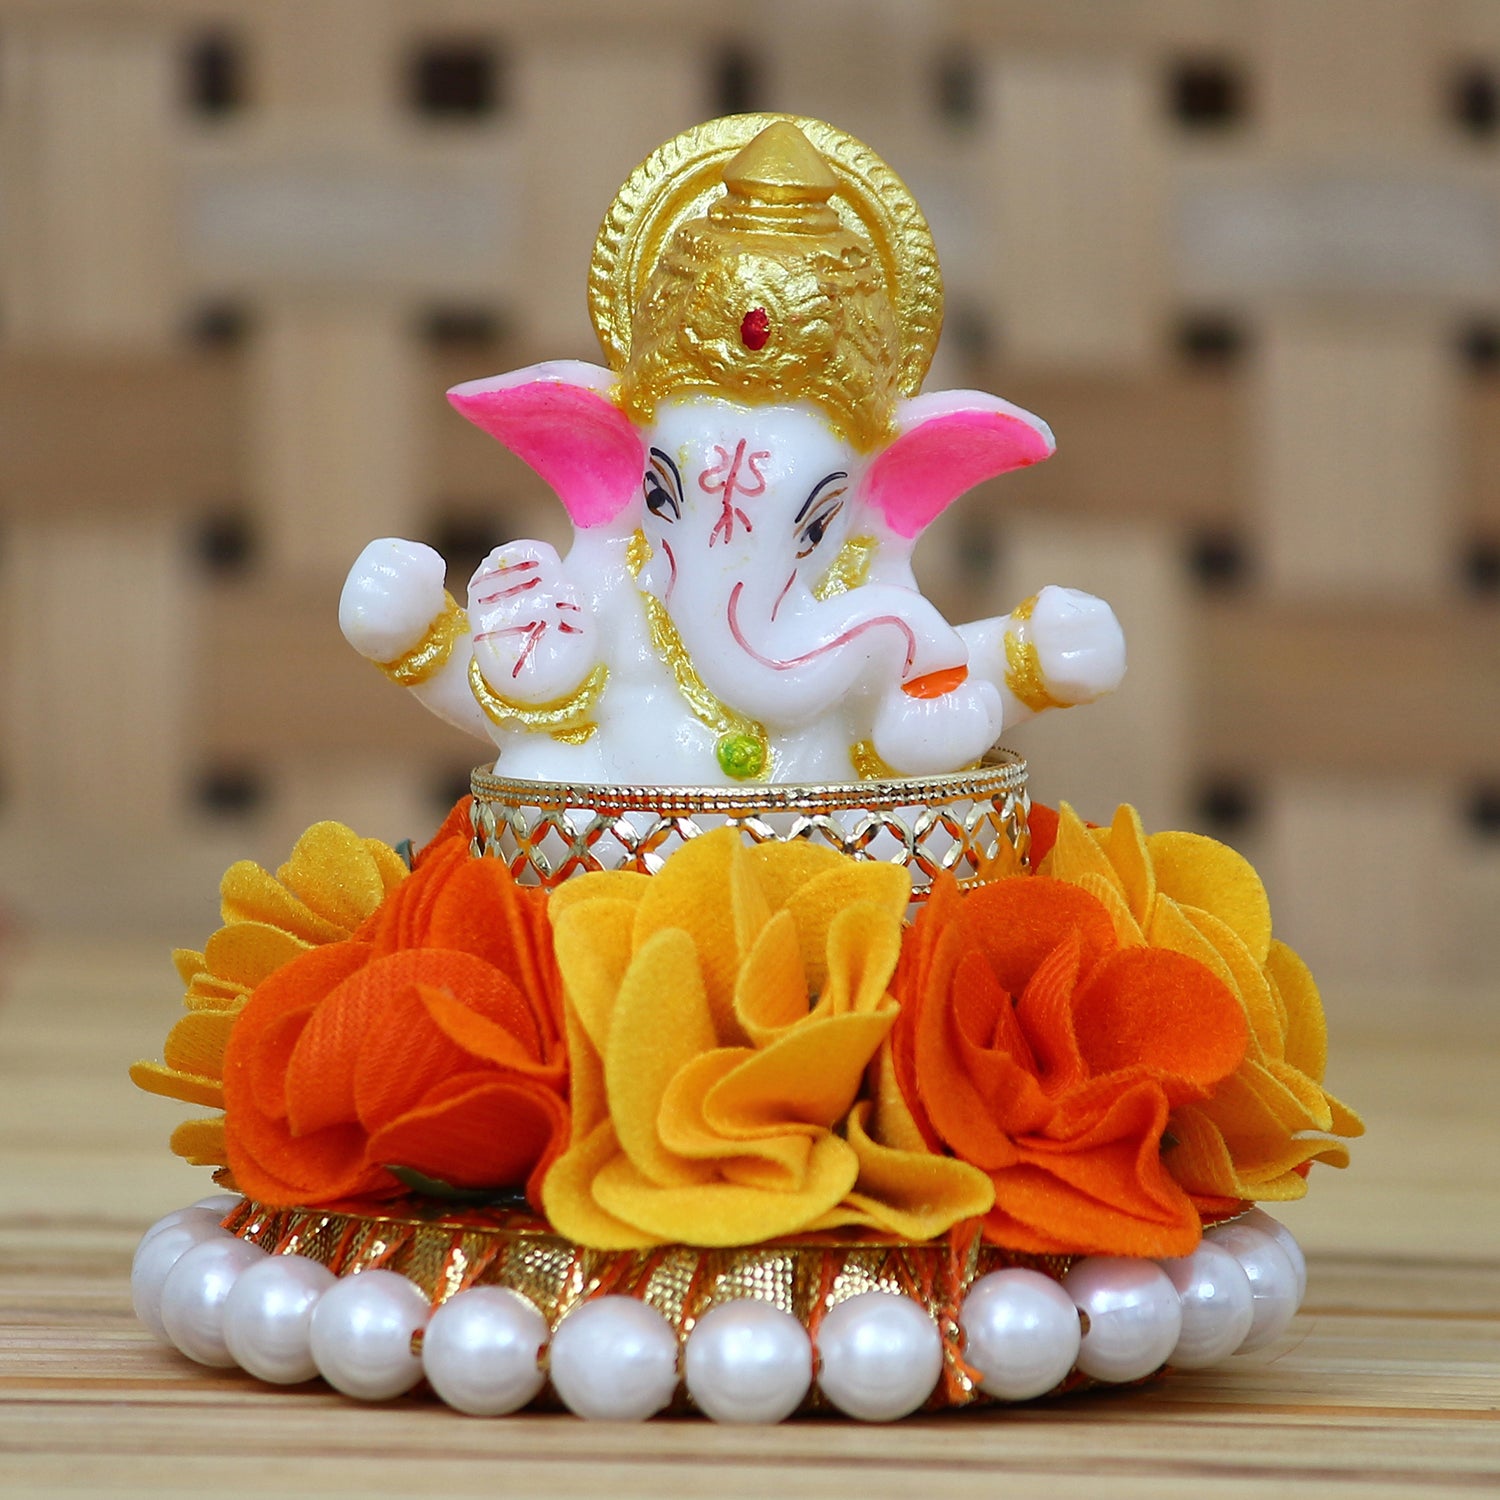 Lord Ganesha Idol On Decorative Handcrafted Orange And Yellow Flowers Plate 1